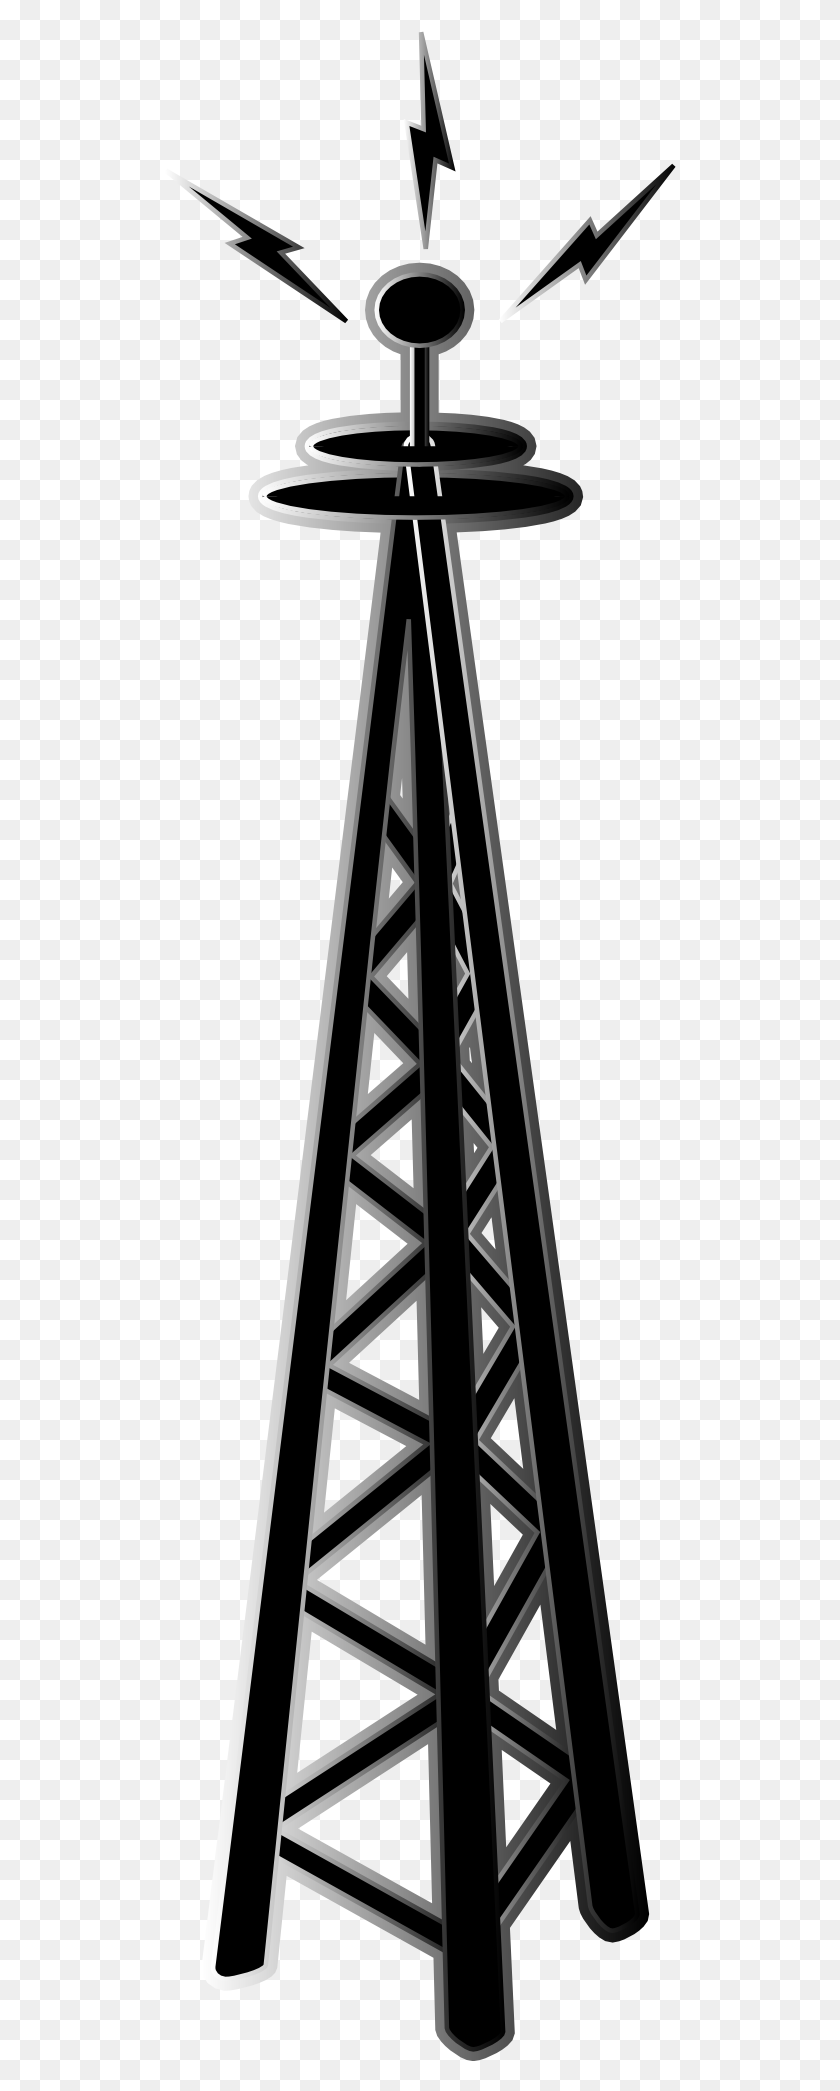 512x2031 Cell Tower Clip Art Look At Cell Tower Clip Art Clip Art Images - Cartoon Roller Coaster Clipart